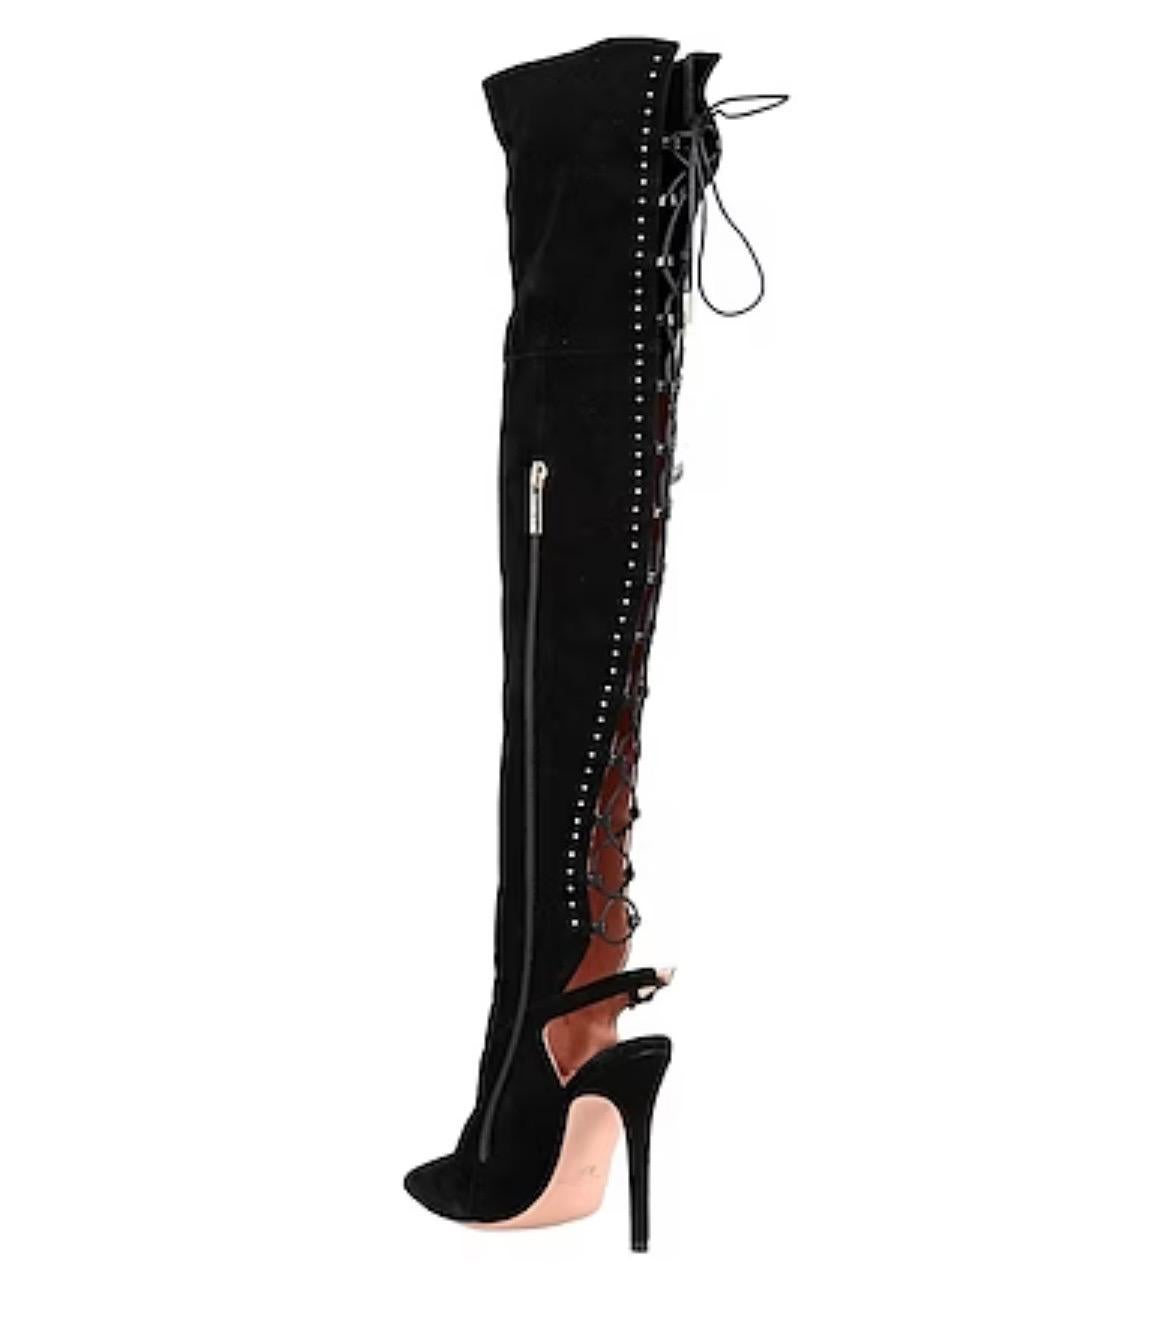 Black suede leather over-the-knee boots with gold sequin embroidered detail. It features a sculpted heel, and lace at the back
External Composition: 100% Suede
Internal Composition: Kidskin
Sole: Leather
Gold snake embellishment
Heel height 100